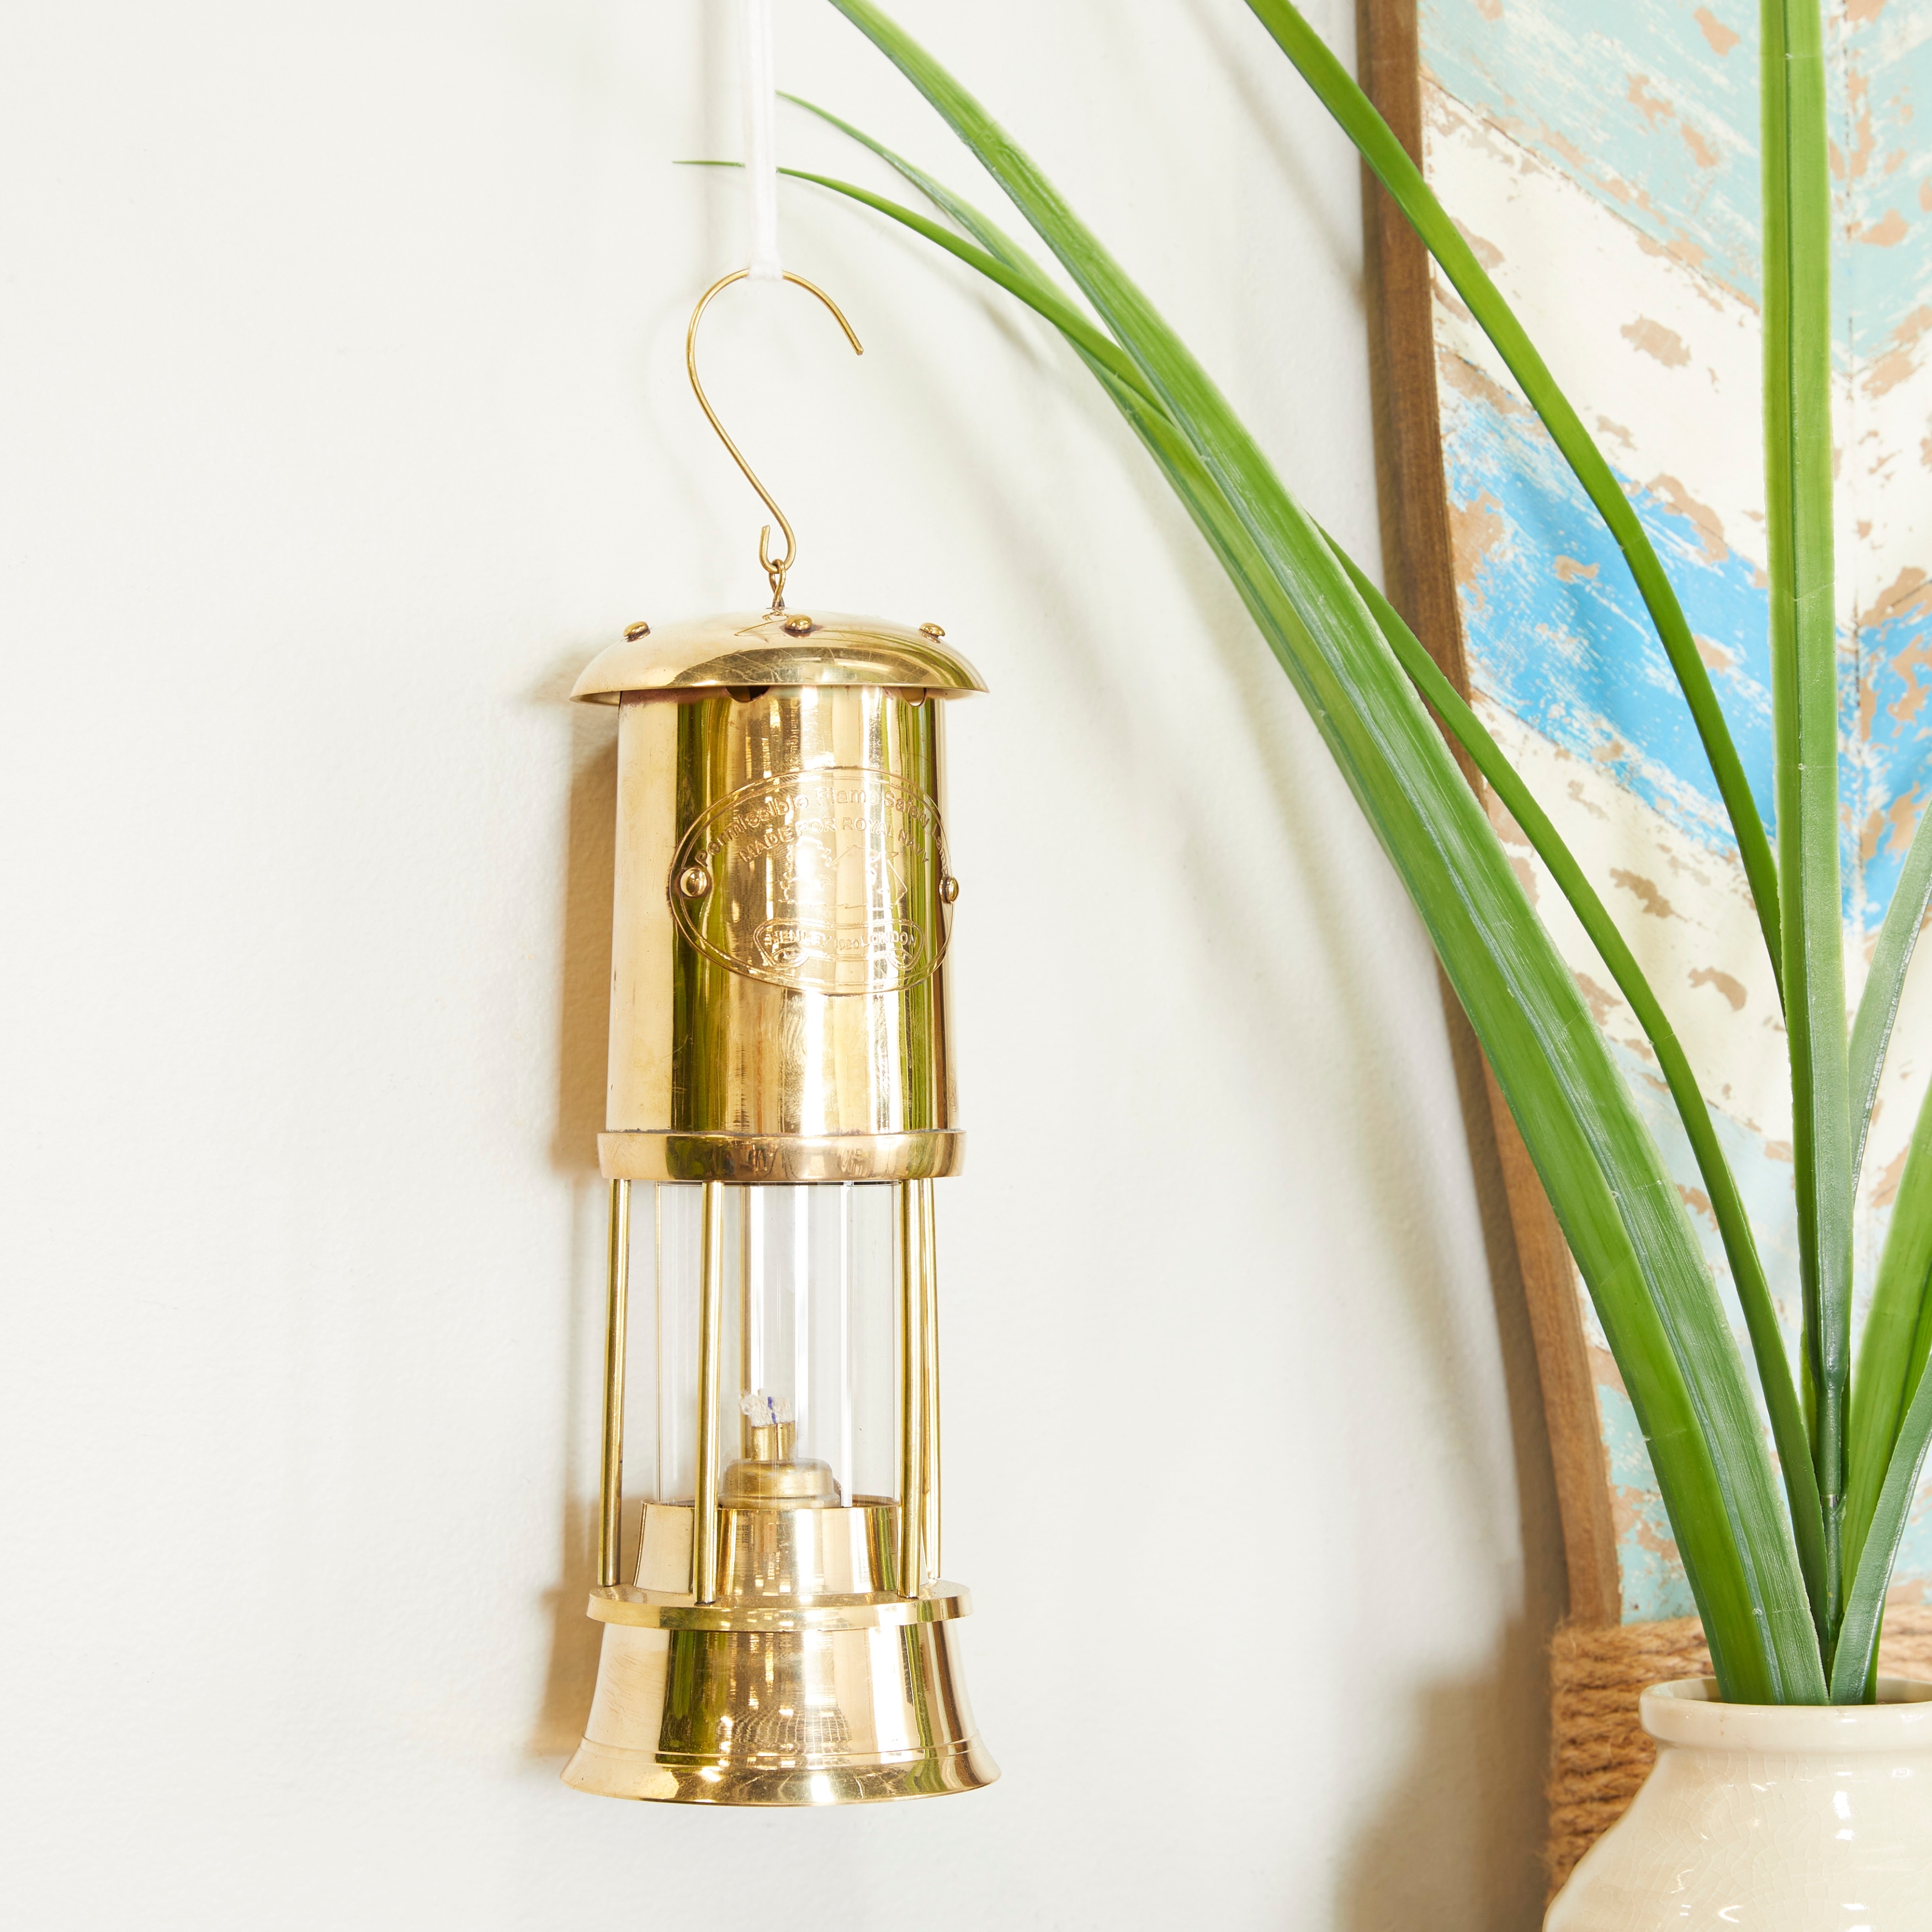 https://ak1.ostkcdn.com/images/products/is/images/direct/a93153d549eee7115e199500352d61c411477c78/Gold-Brass-Nautical-Lantern.jpg